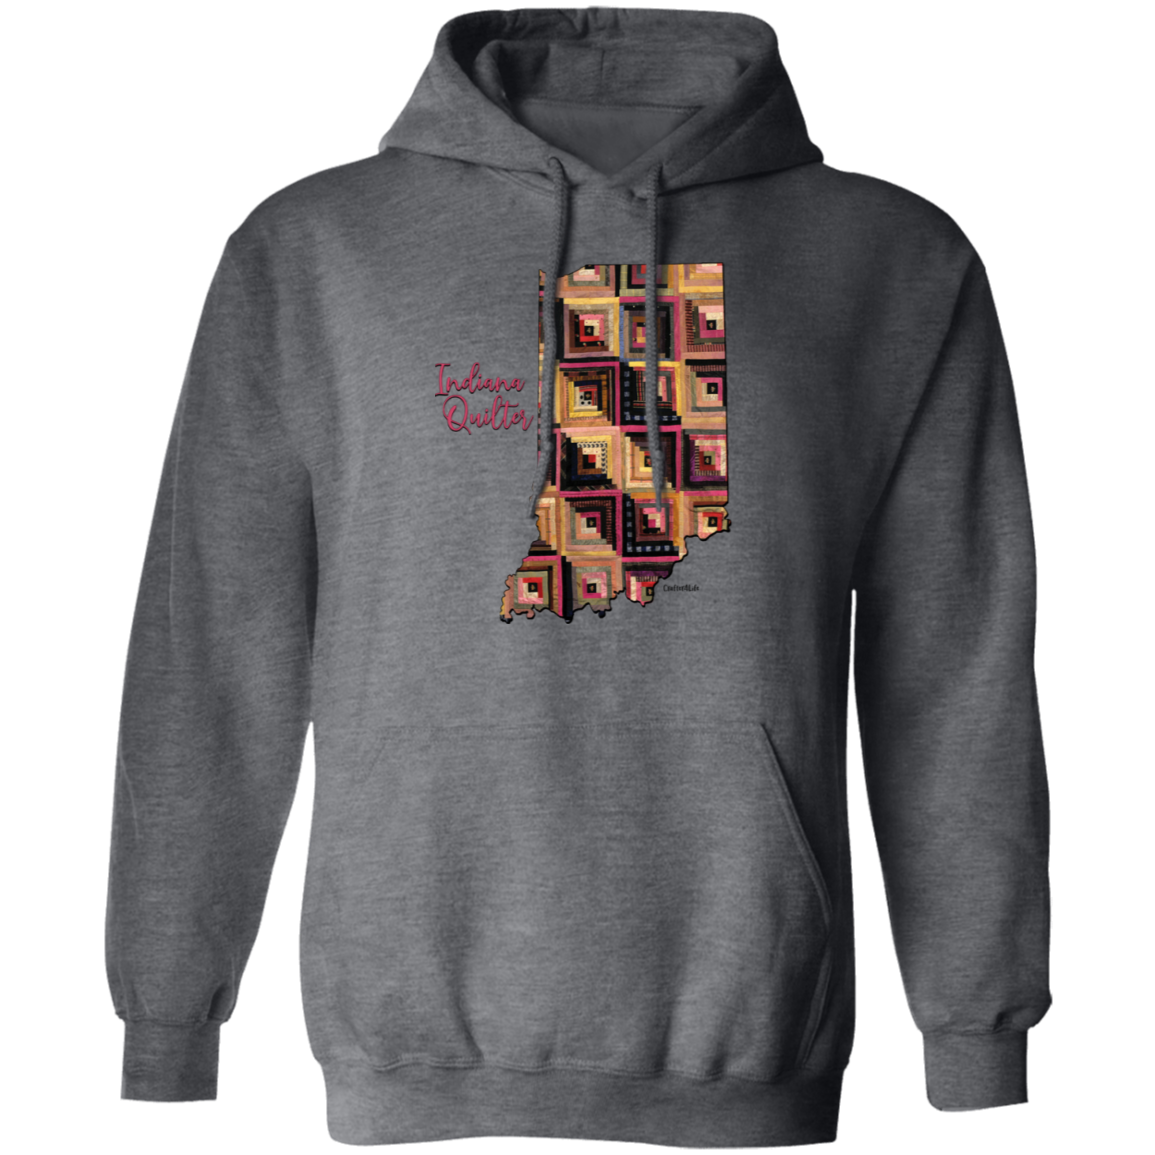 Indiana Quilter Pullover Hoodie, Gift for Quilting Friends and Family